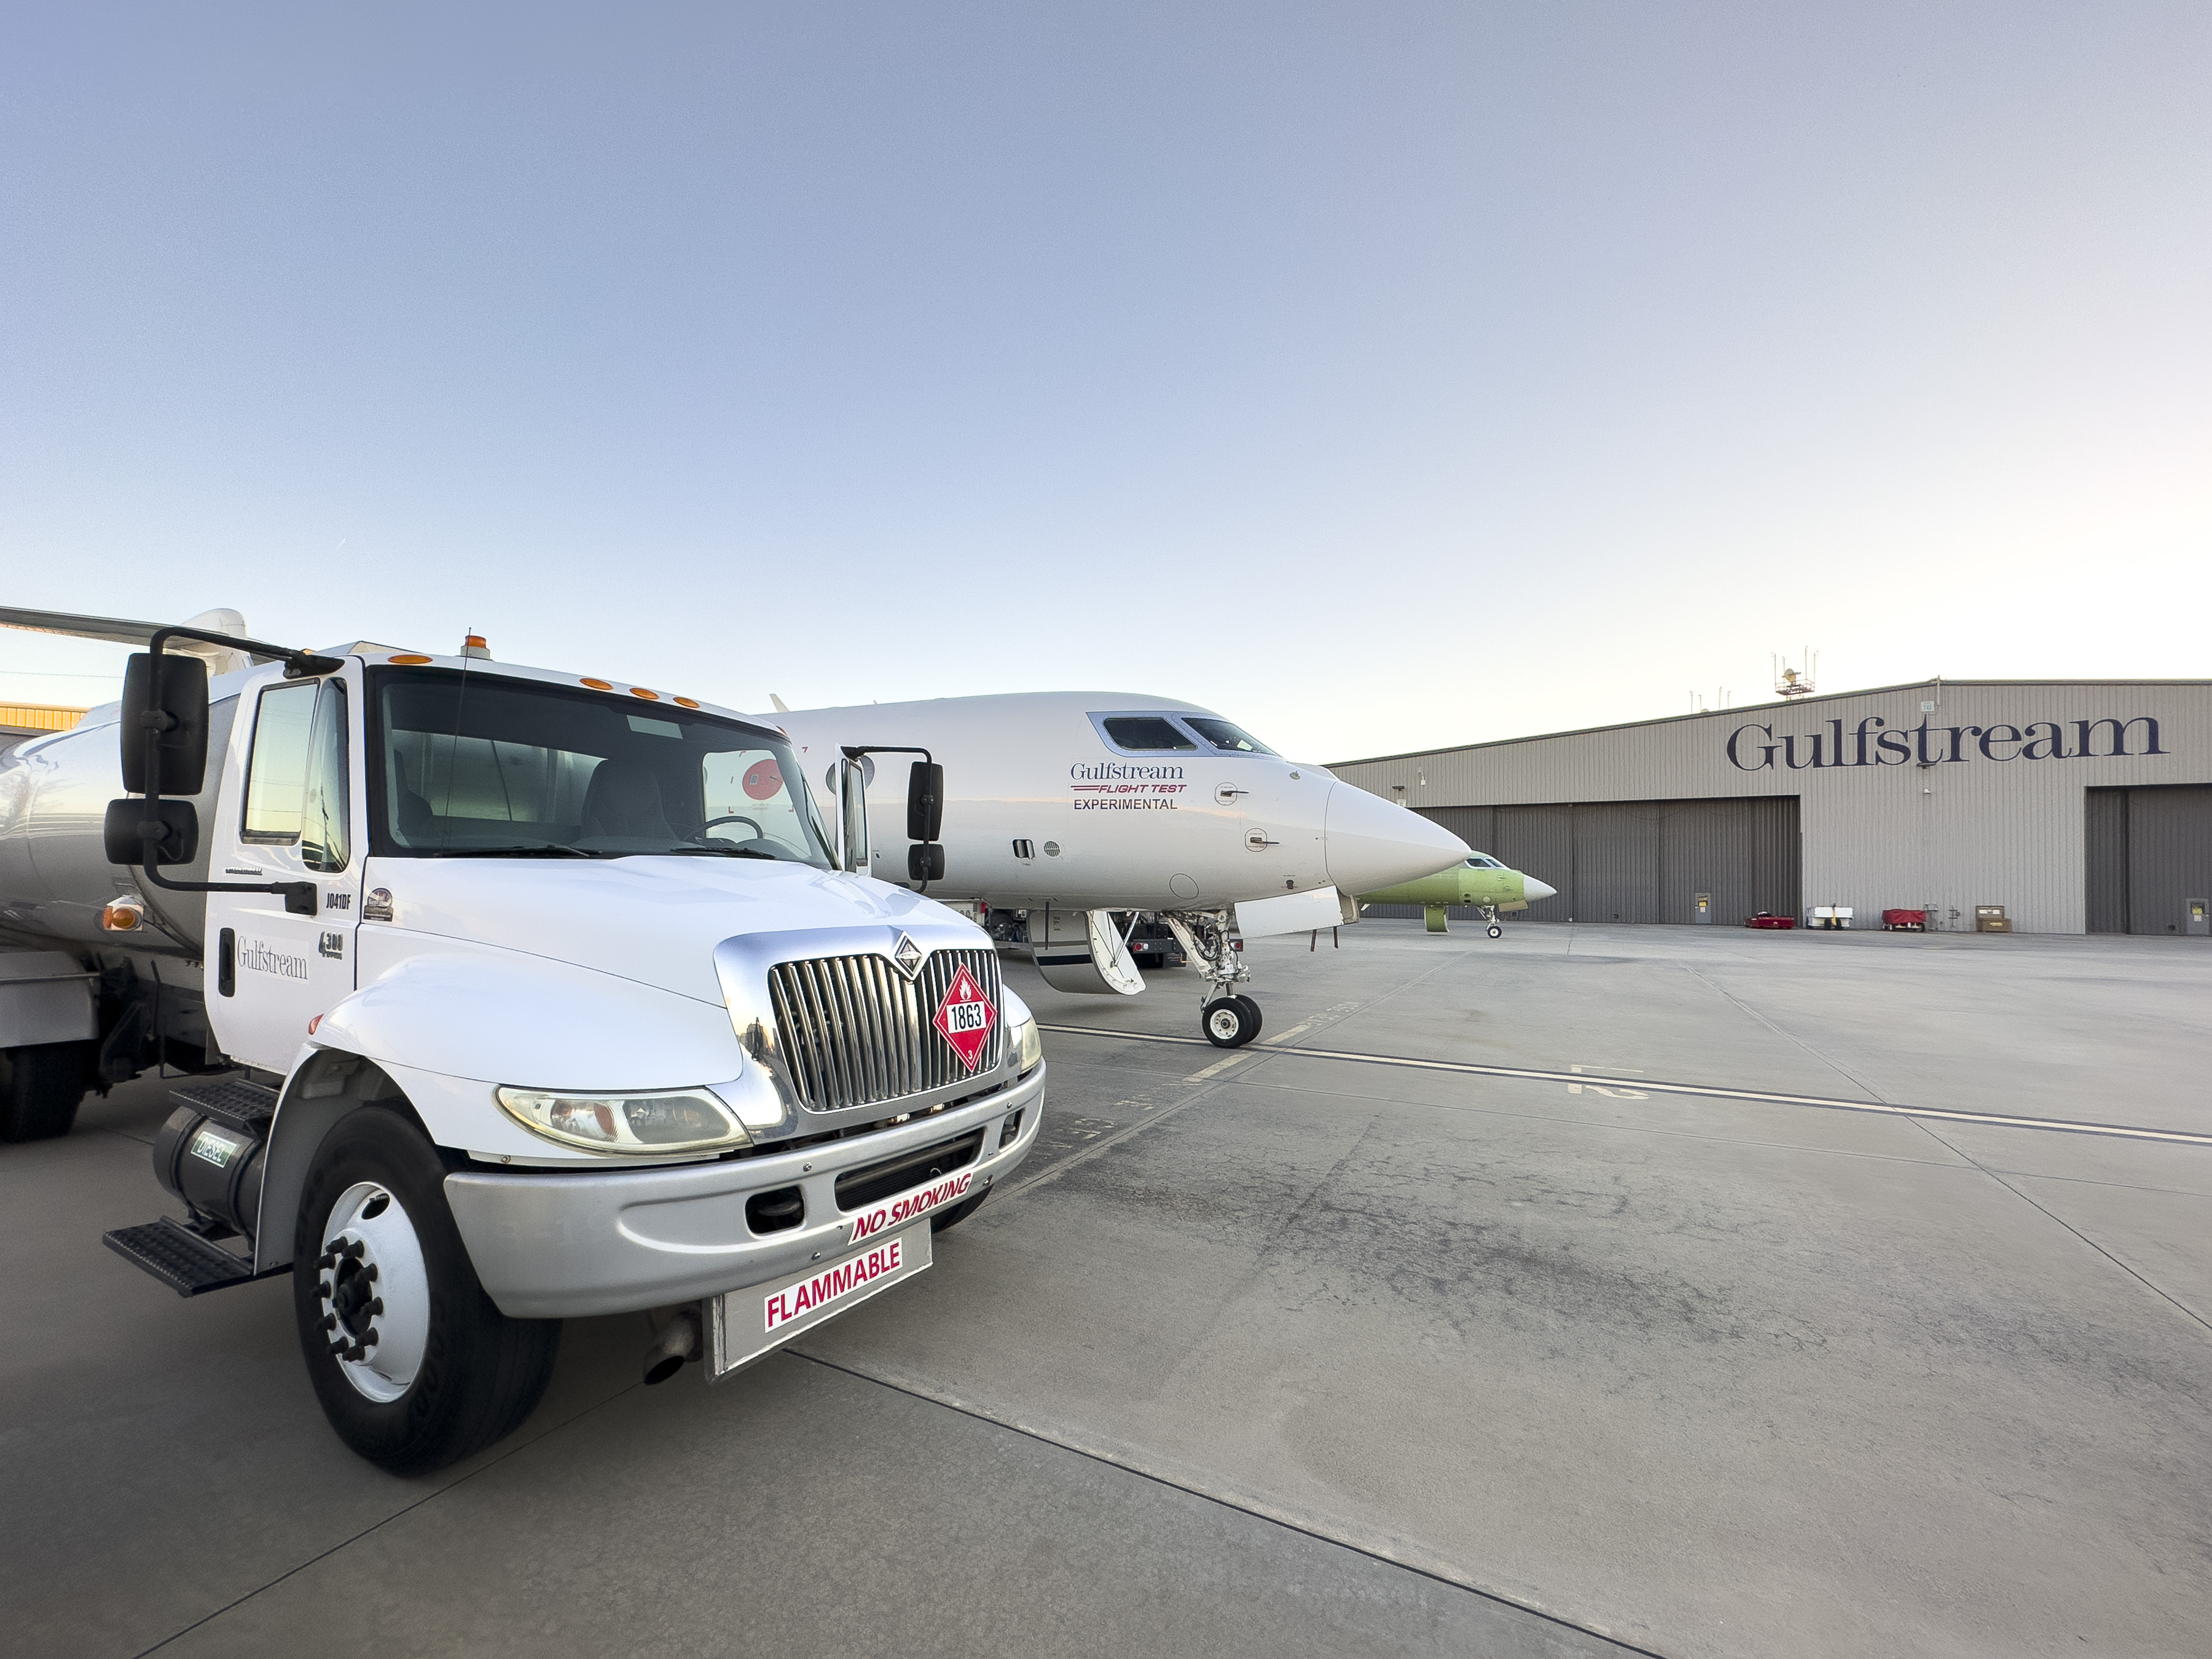 Industry first as Gulfstream makes 100% SAF flight from its Savannah headquarters